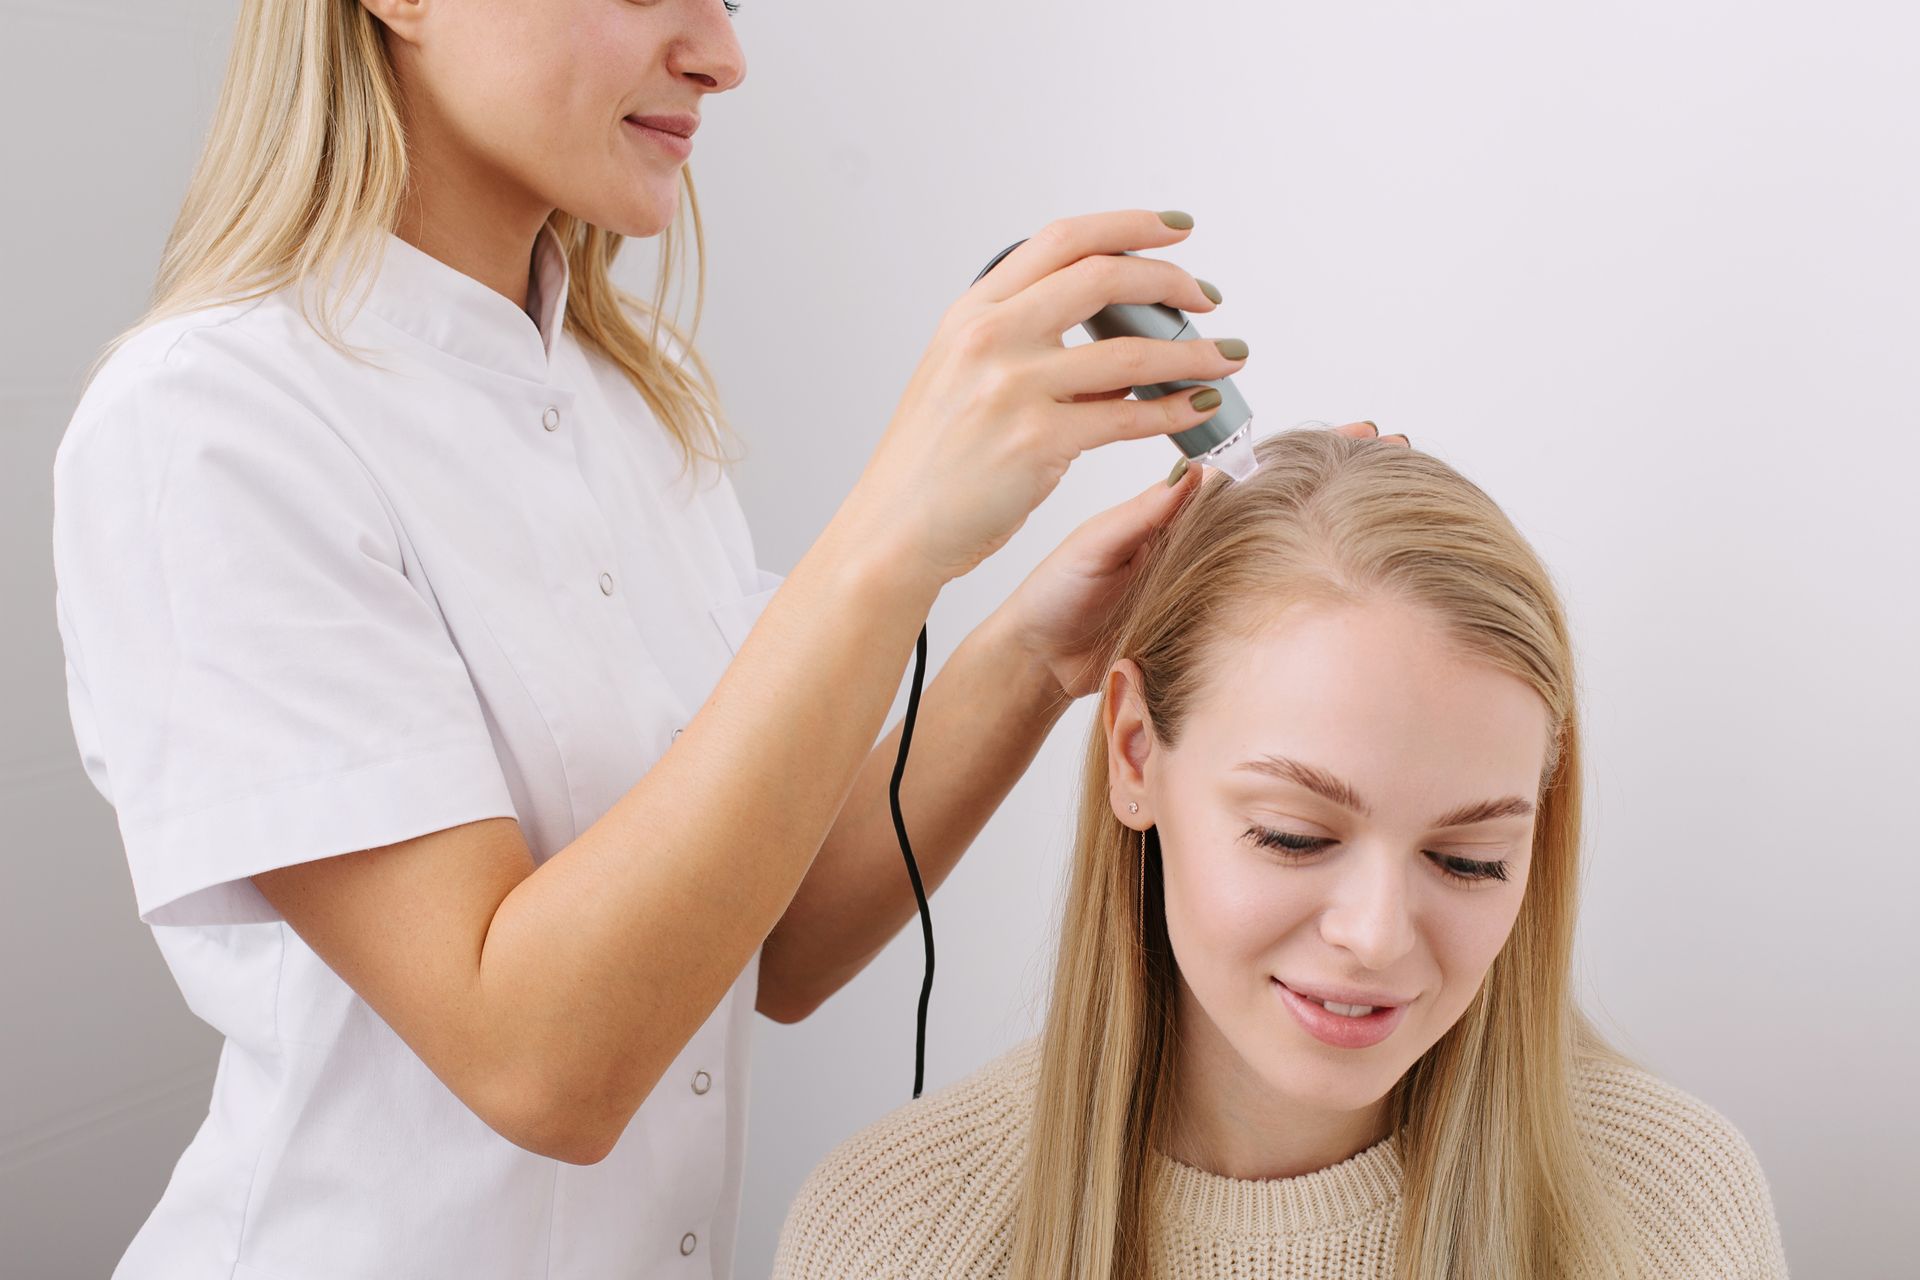 a woman is getting her hair examined by a doctor